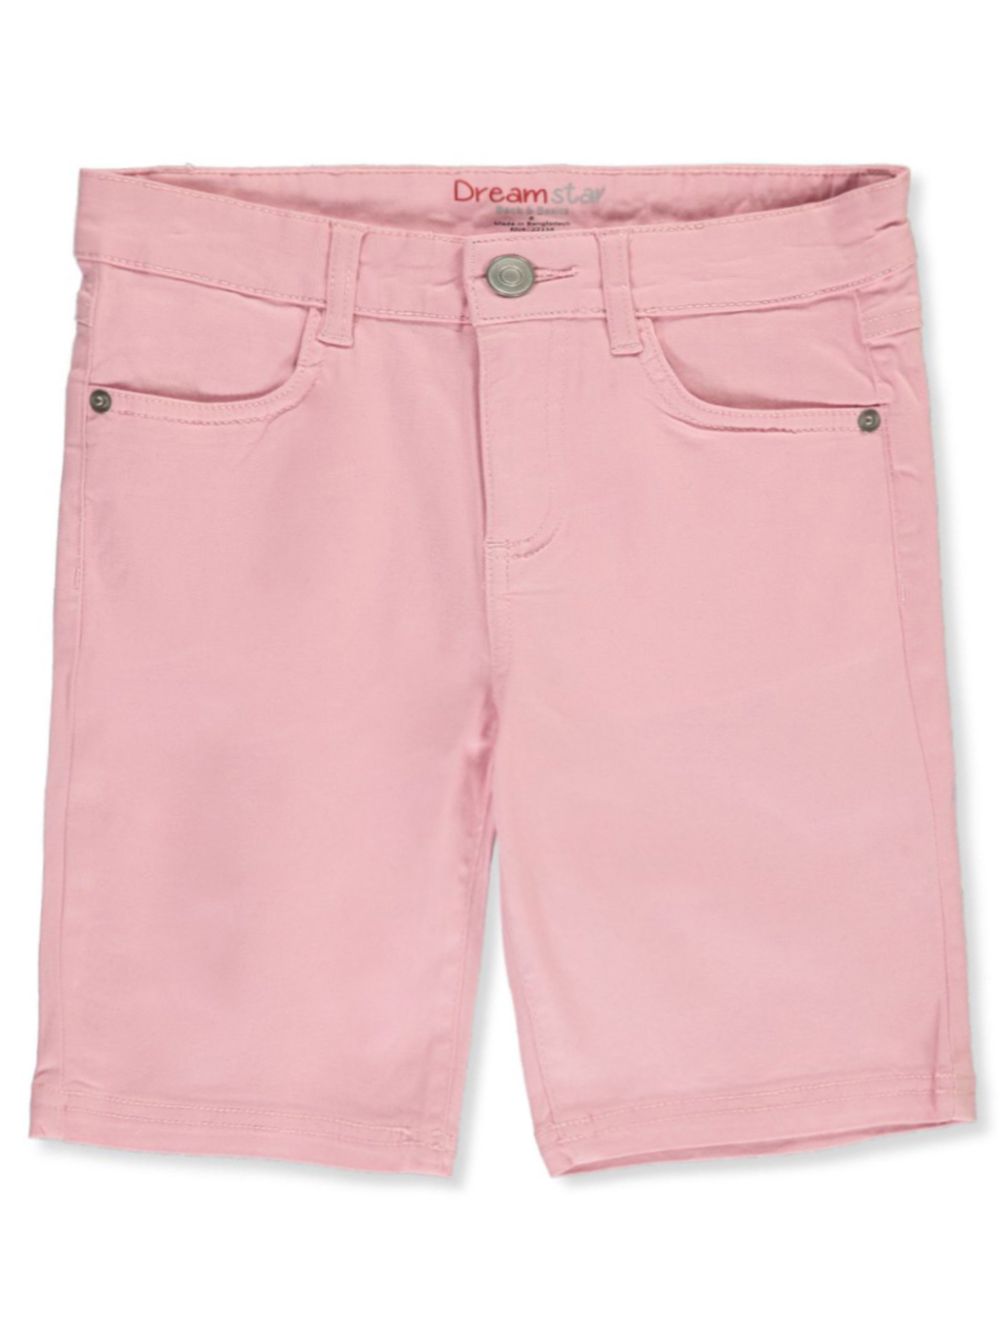 Size 2t Shorts for Girls